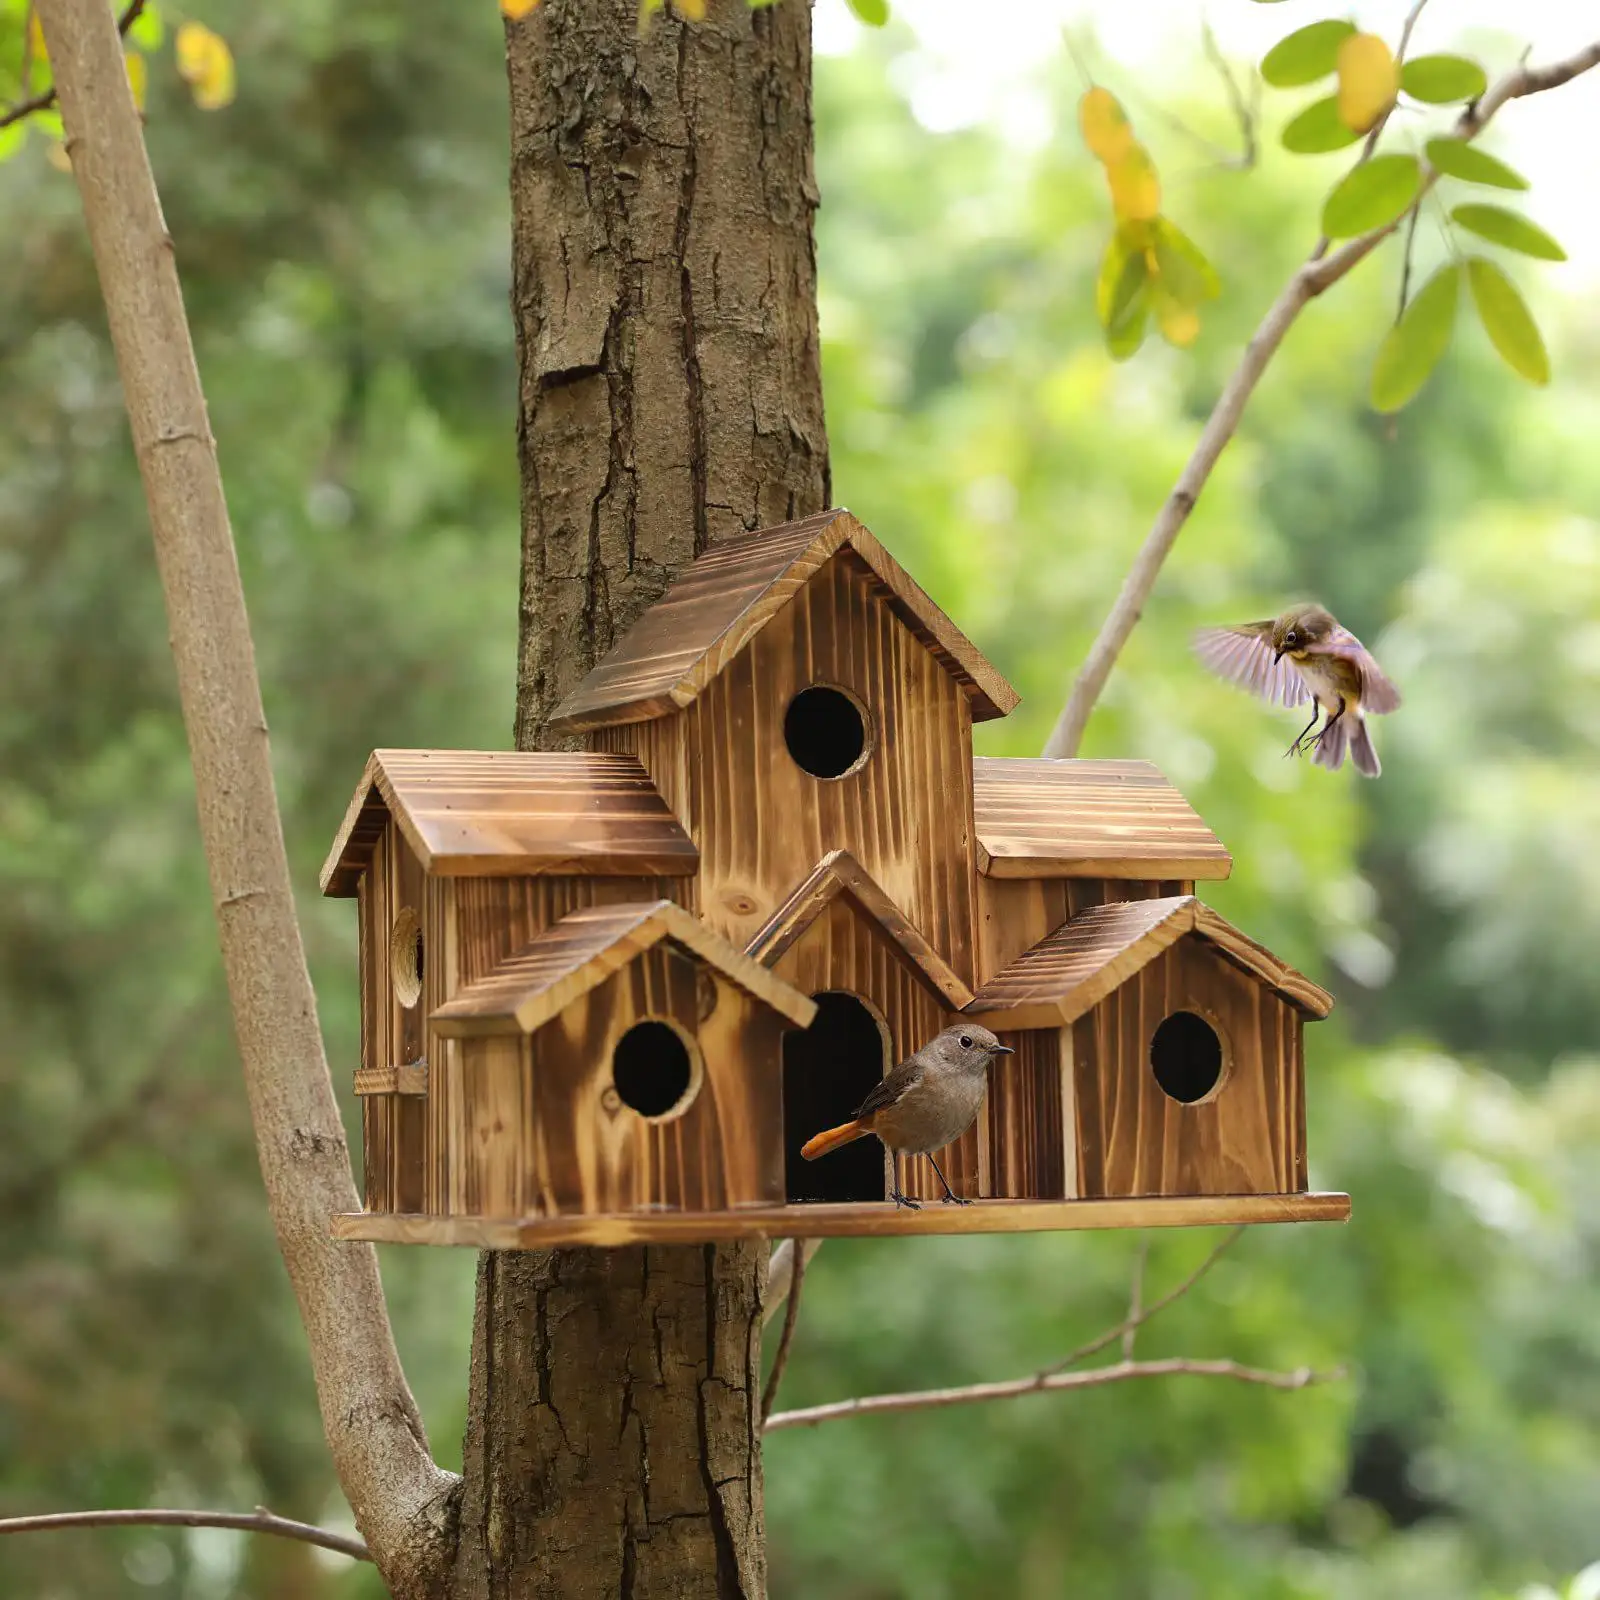 Hanging Birdhouses Birds Hut Natural Decor Supplies 6 Hole bird Cage for Courtyard Outside Lawn Decor